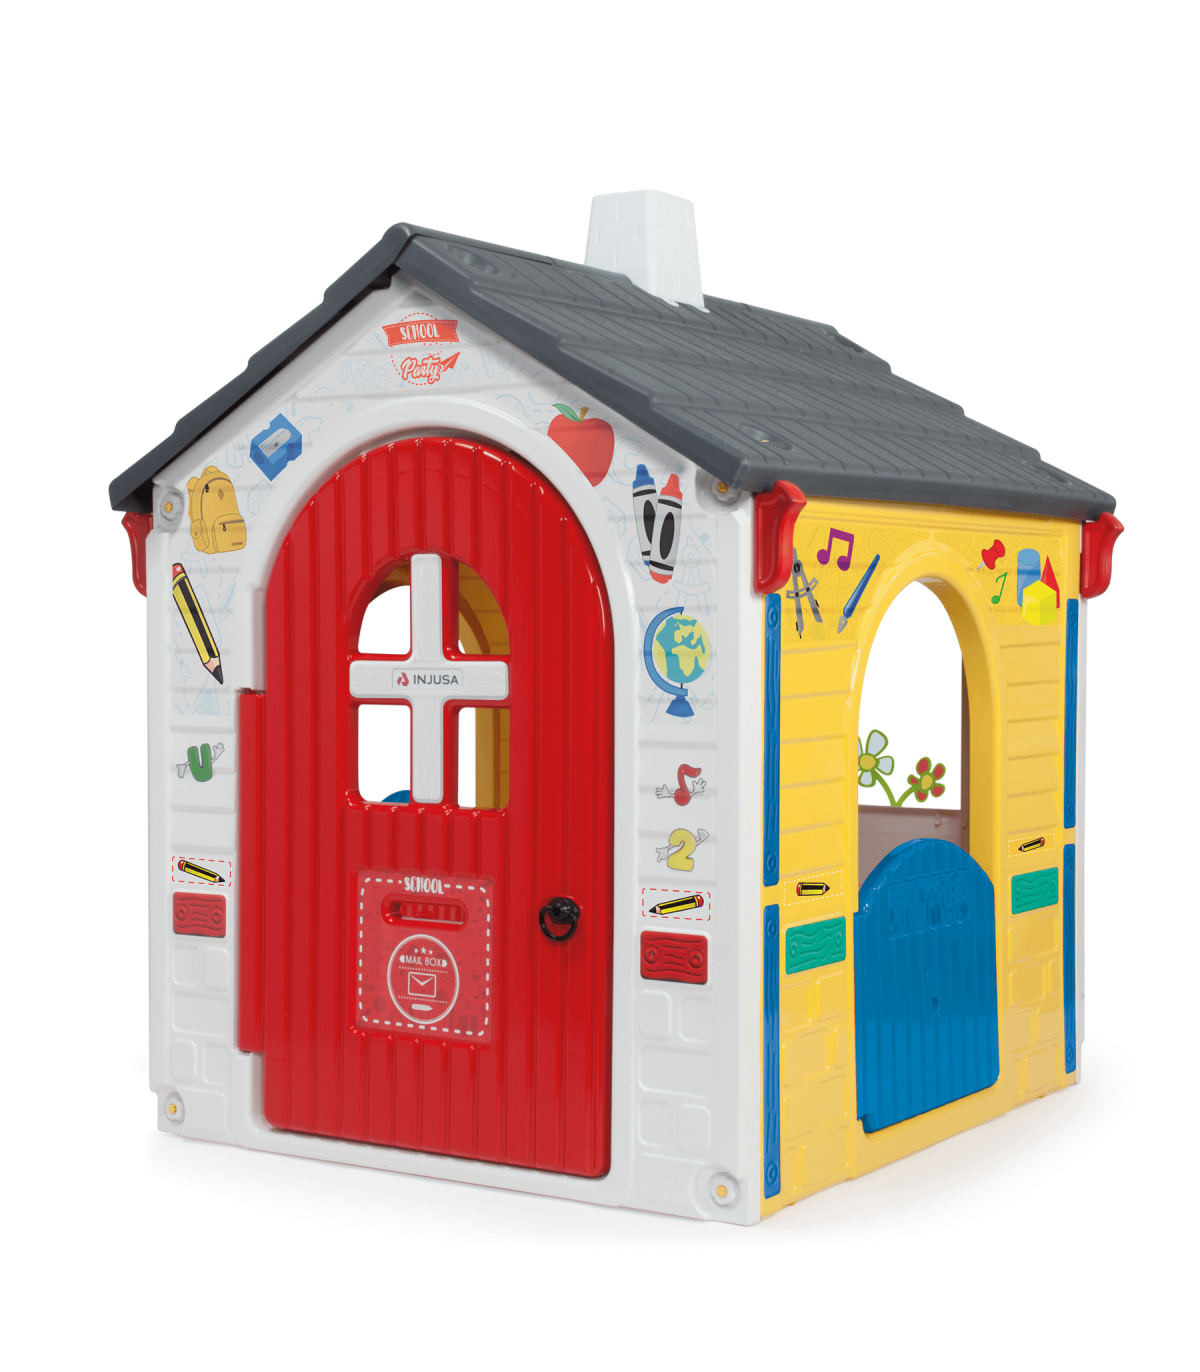 School Party Playhouse, Made in Spain